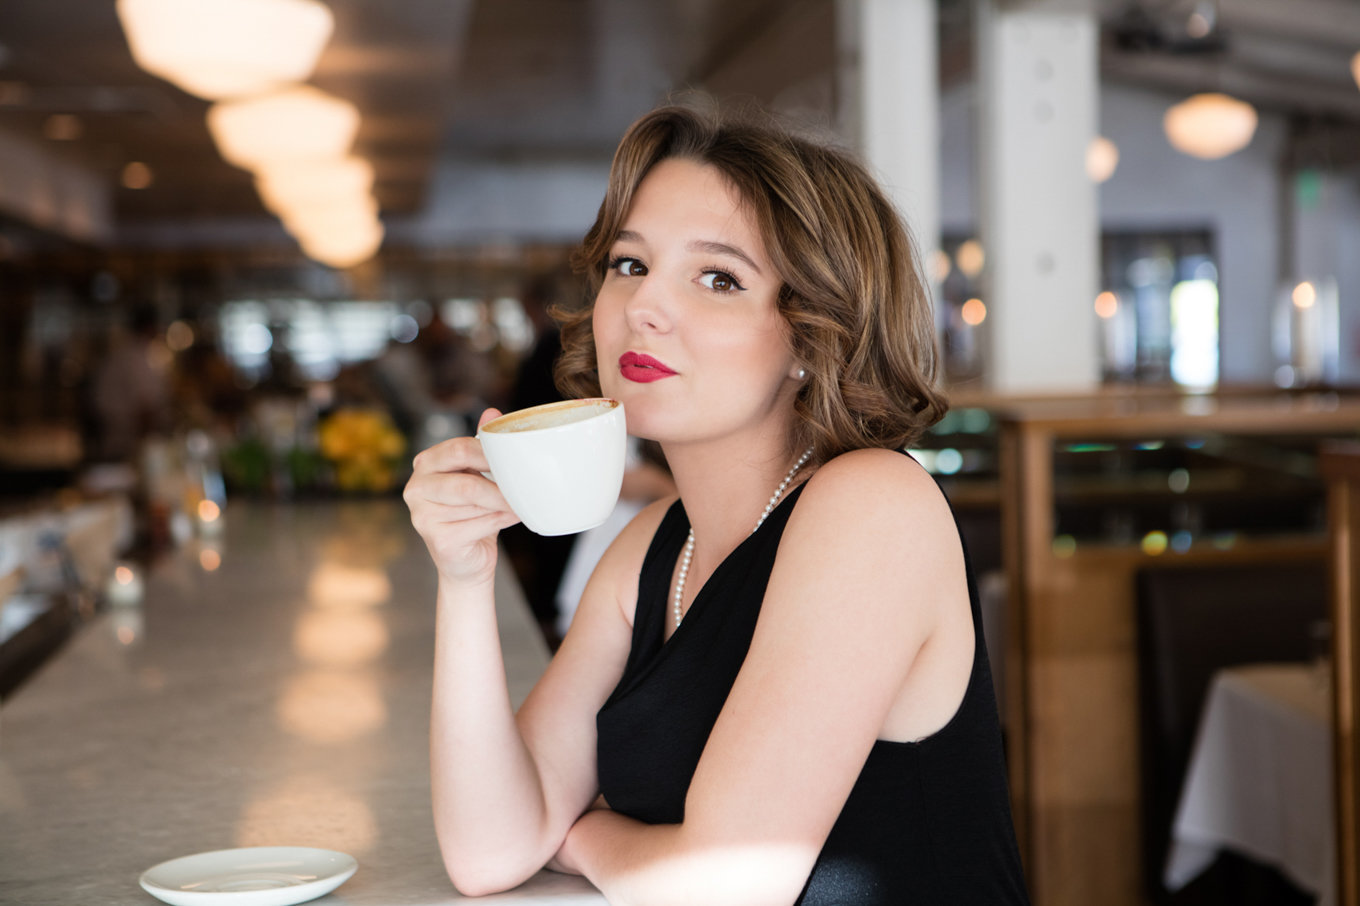 Beauty and Commercial Girl with Coffee